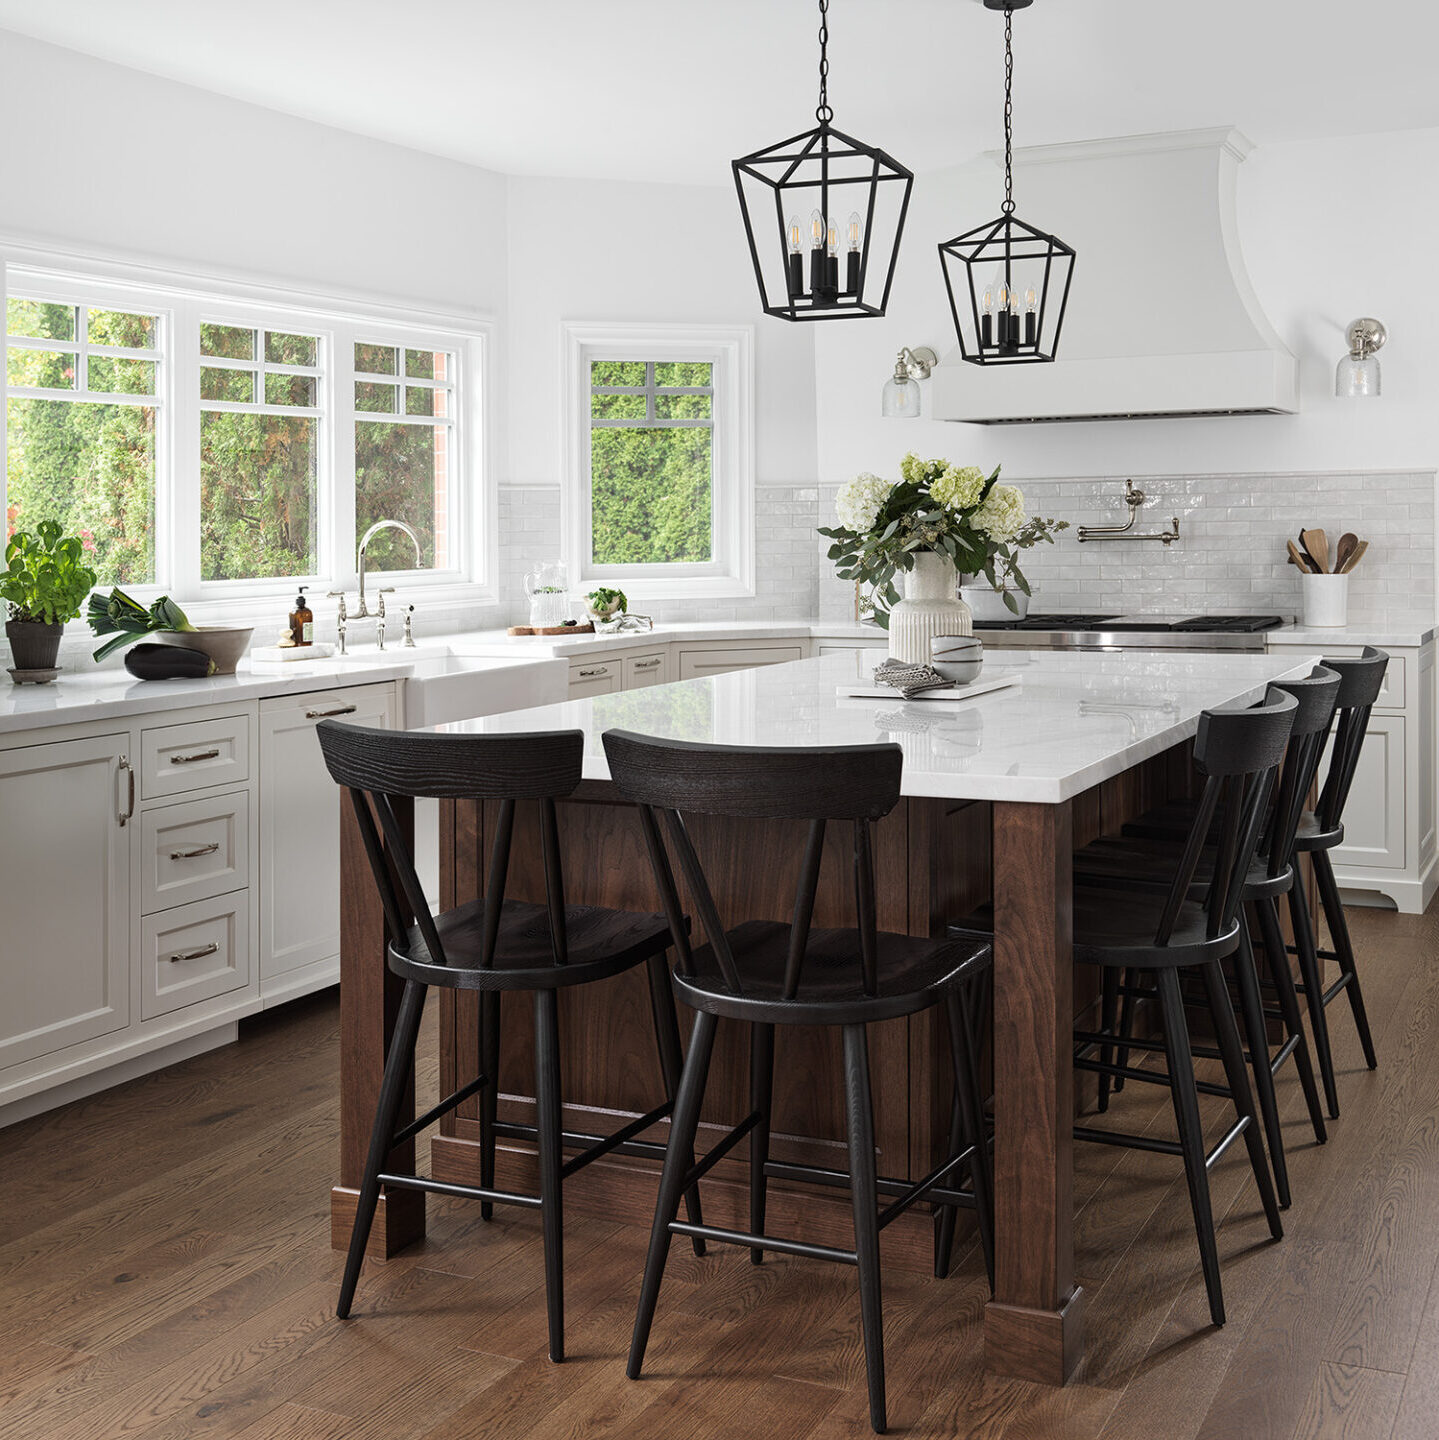 Bright white kitchen with rich wood-toned flooring. Kitchen island with white counter-top surrounded by black chairs. Longvalley Project by STILE Contracting + Design.